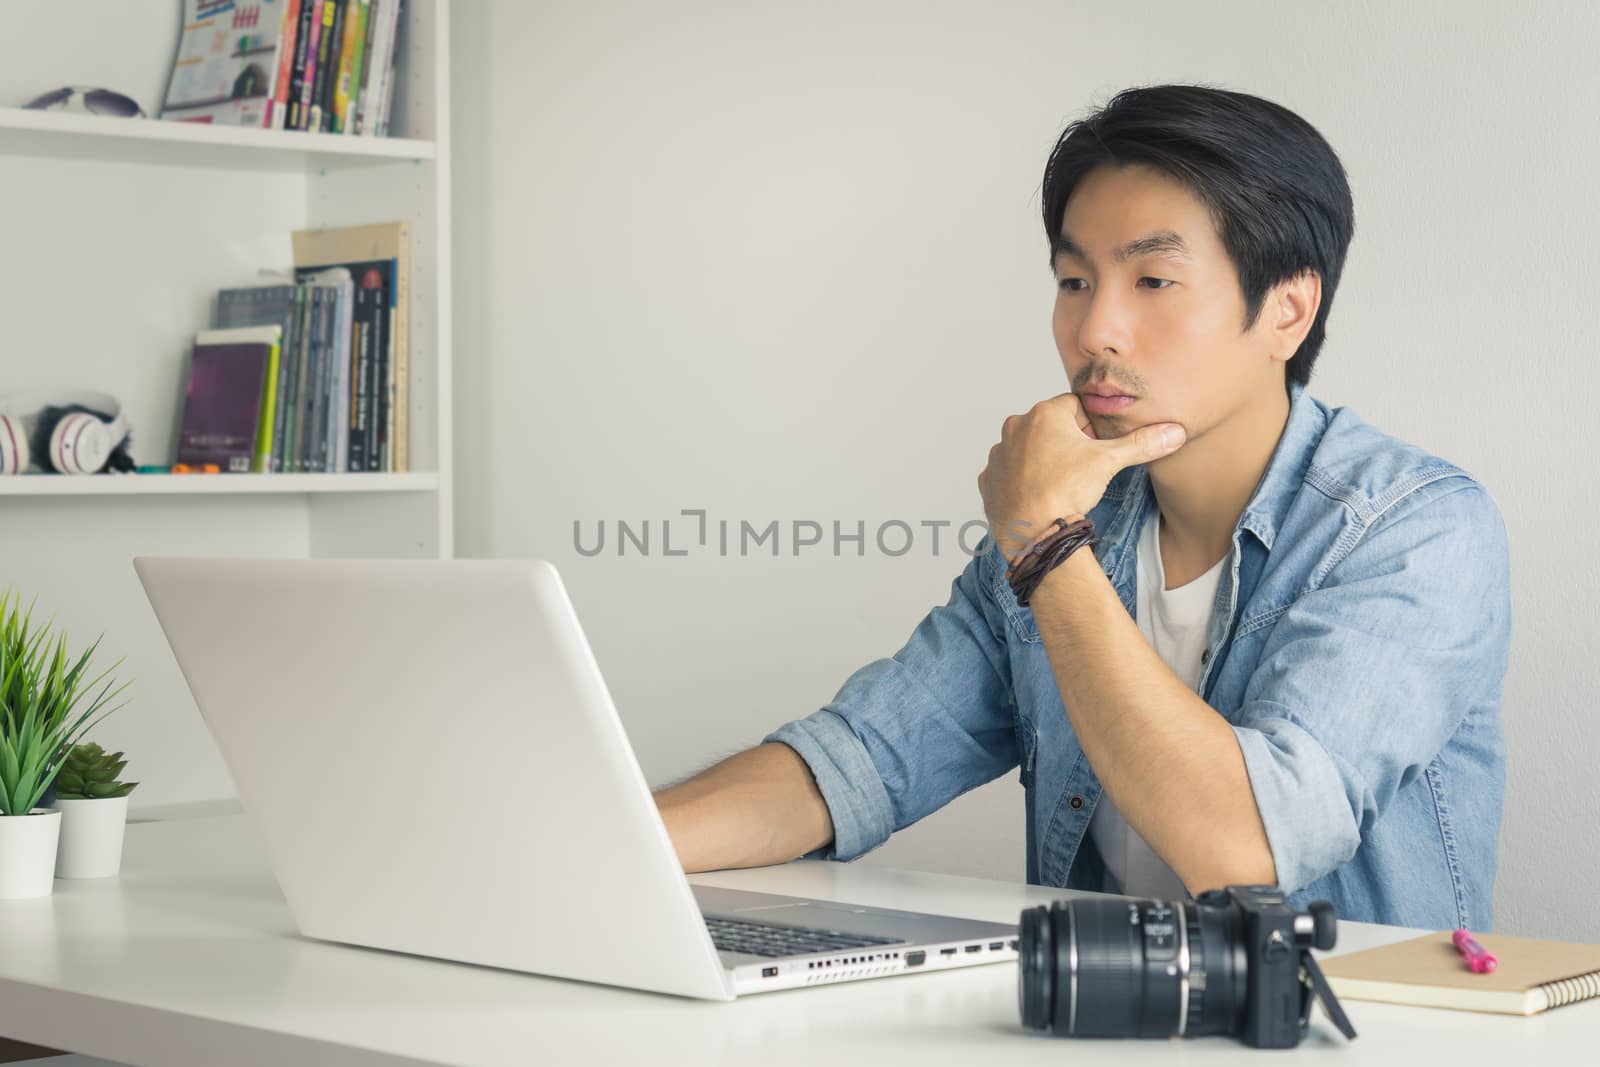 Asian Photographer or Freelancer in Denim or Jeans Shirt Serious Checking Photo File in Laptop in Home Office. Photographer or freelancer working with technology